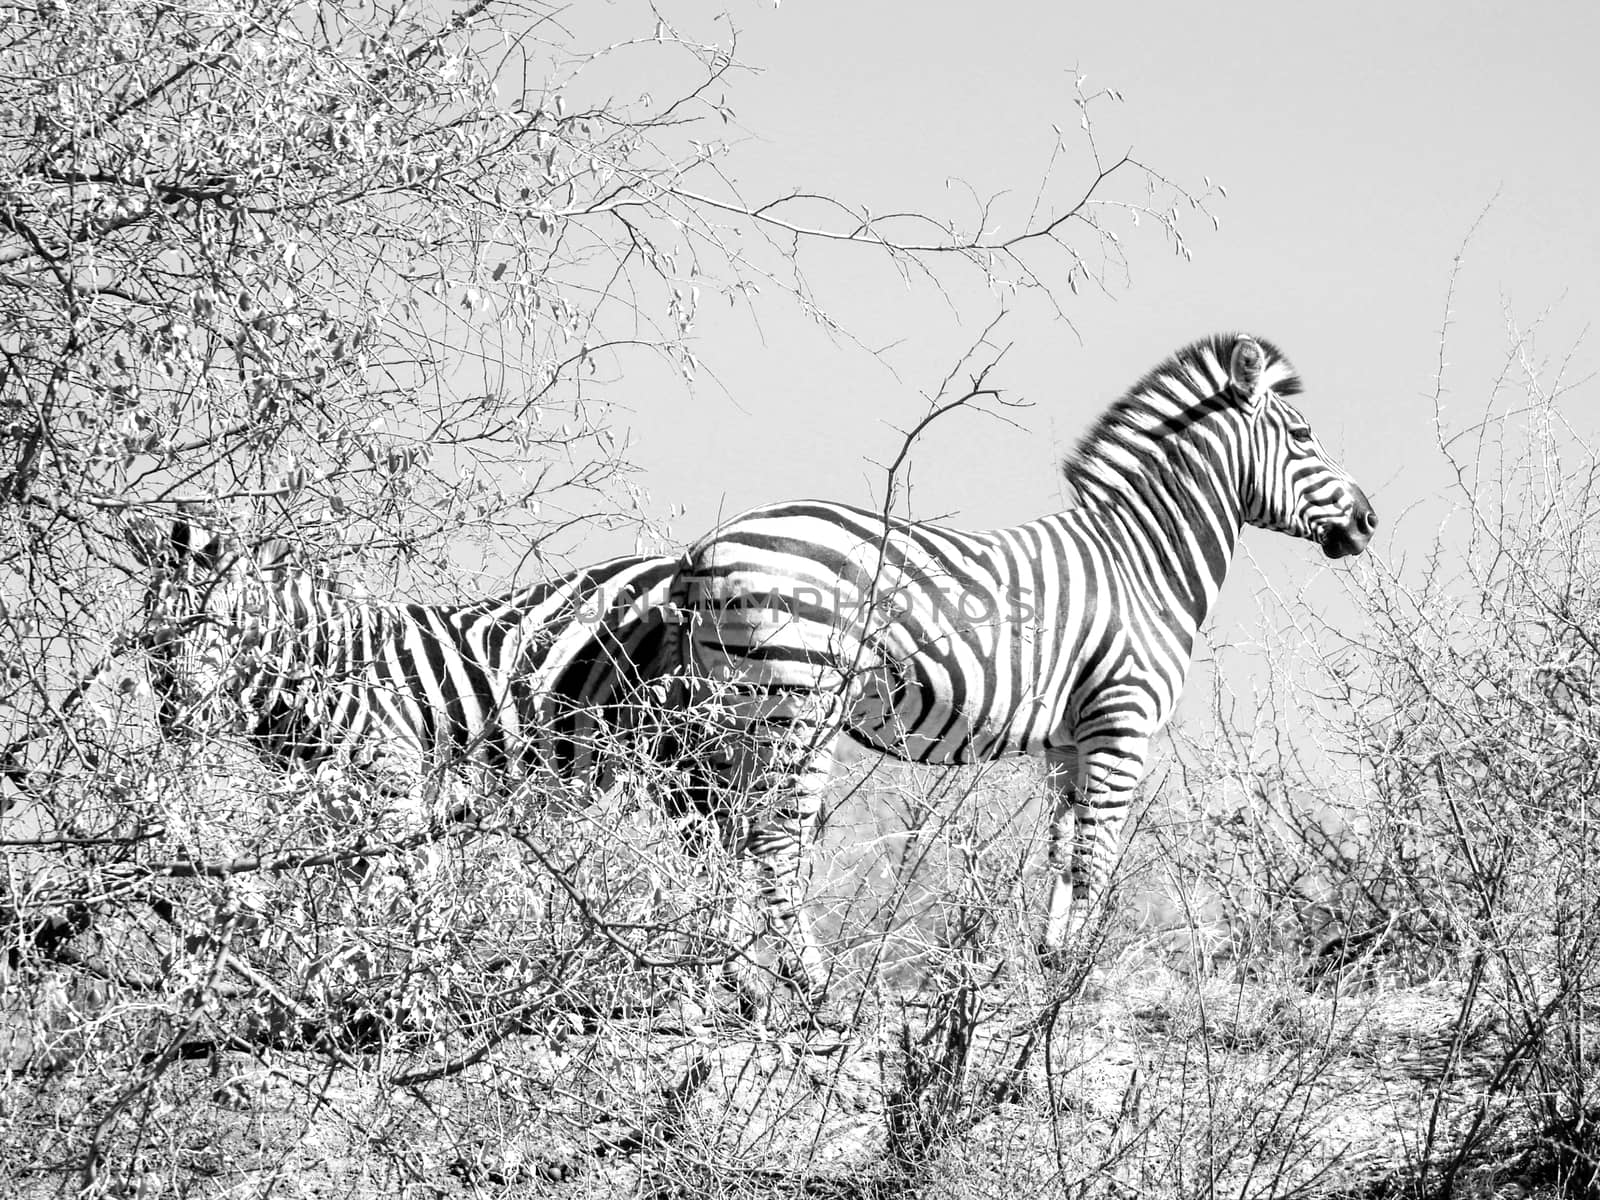 Two zebra standing back to back in sparce African bush their stripes meeting